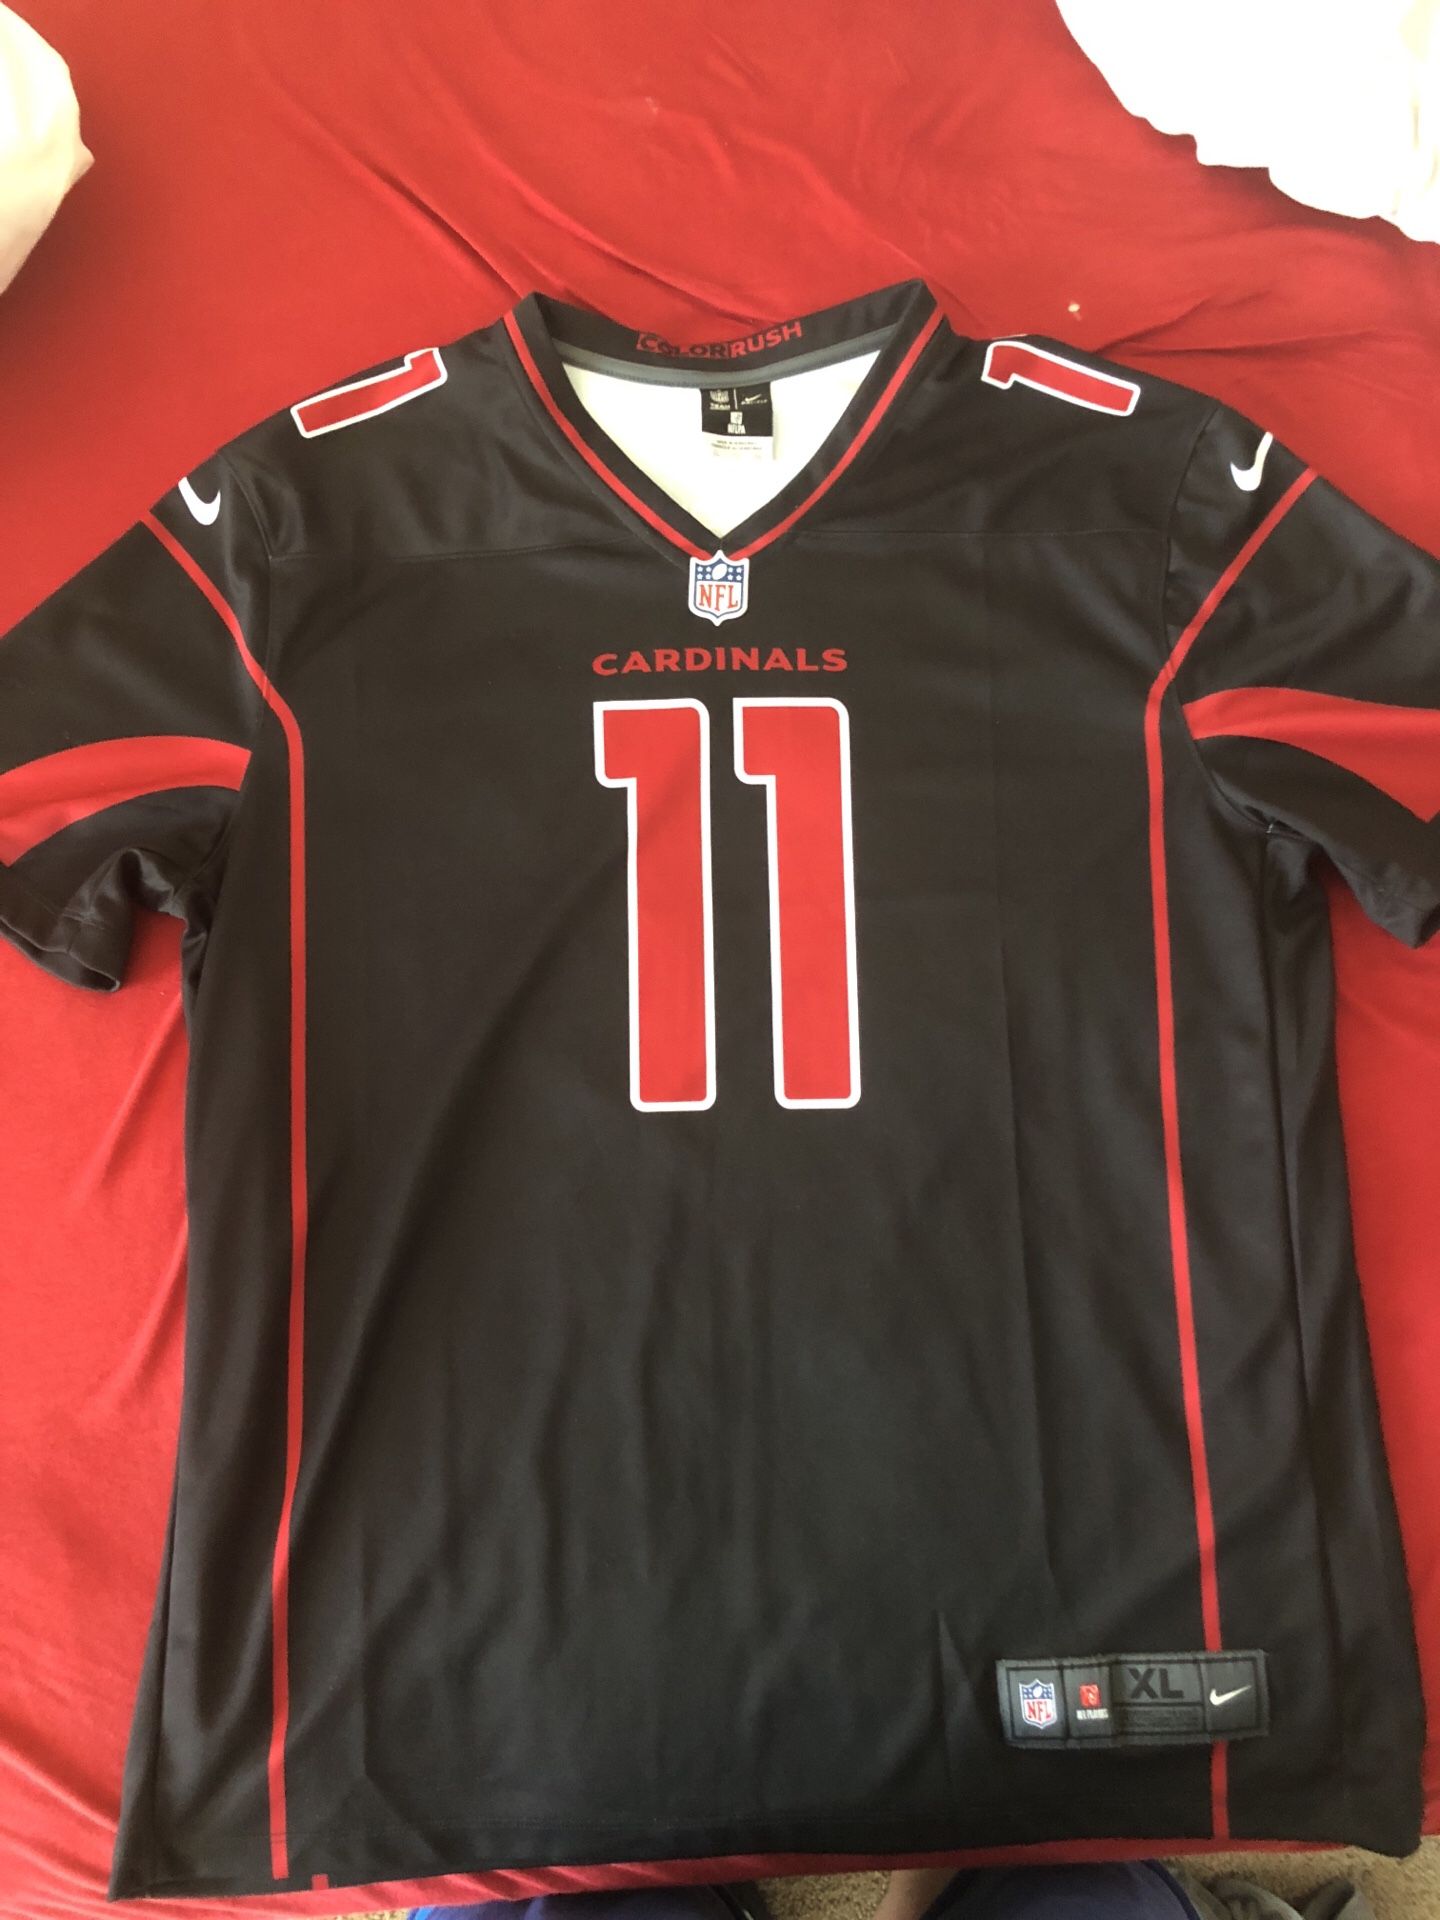 Nike Dry-Fit Larry Fitzgerald XL Jersey (Color Rush Edition) for Sale